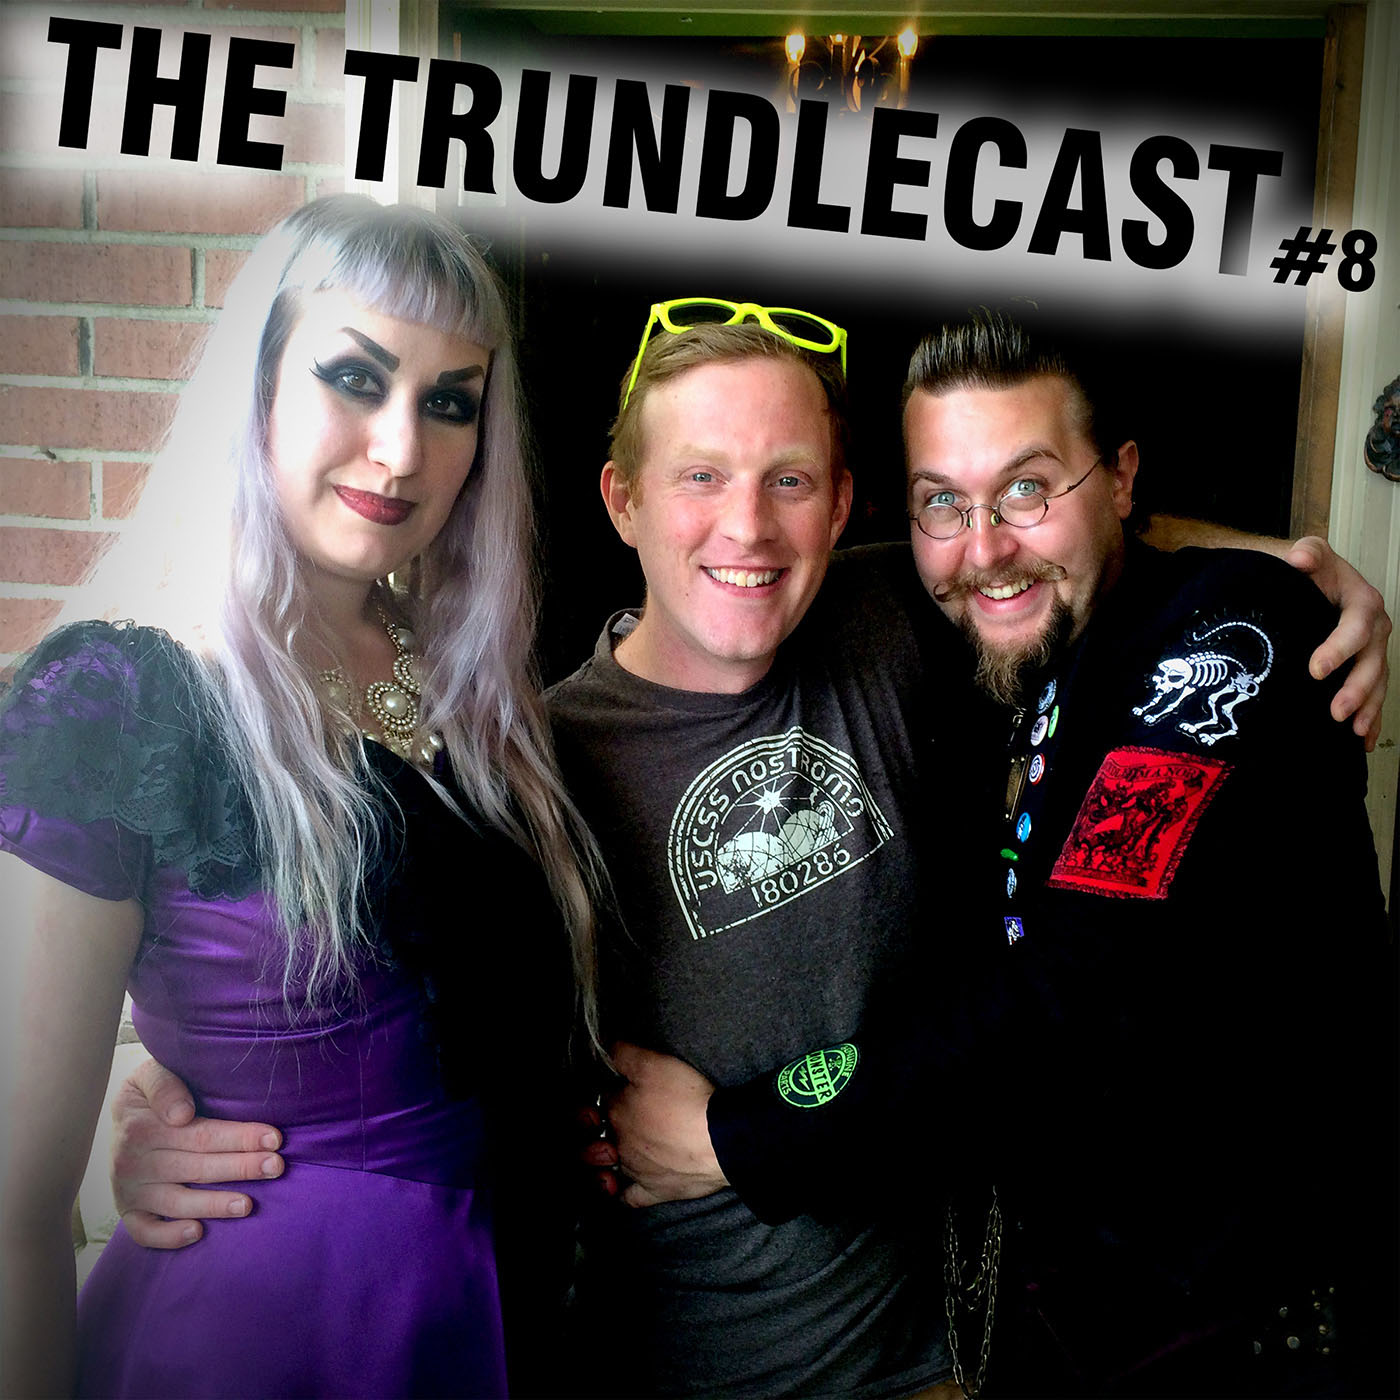 The 8th Trundlecast!